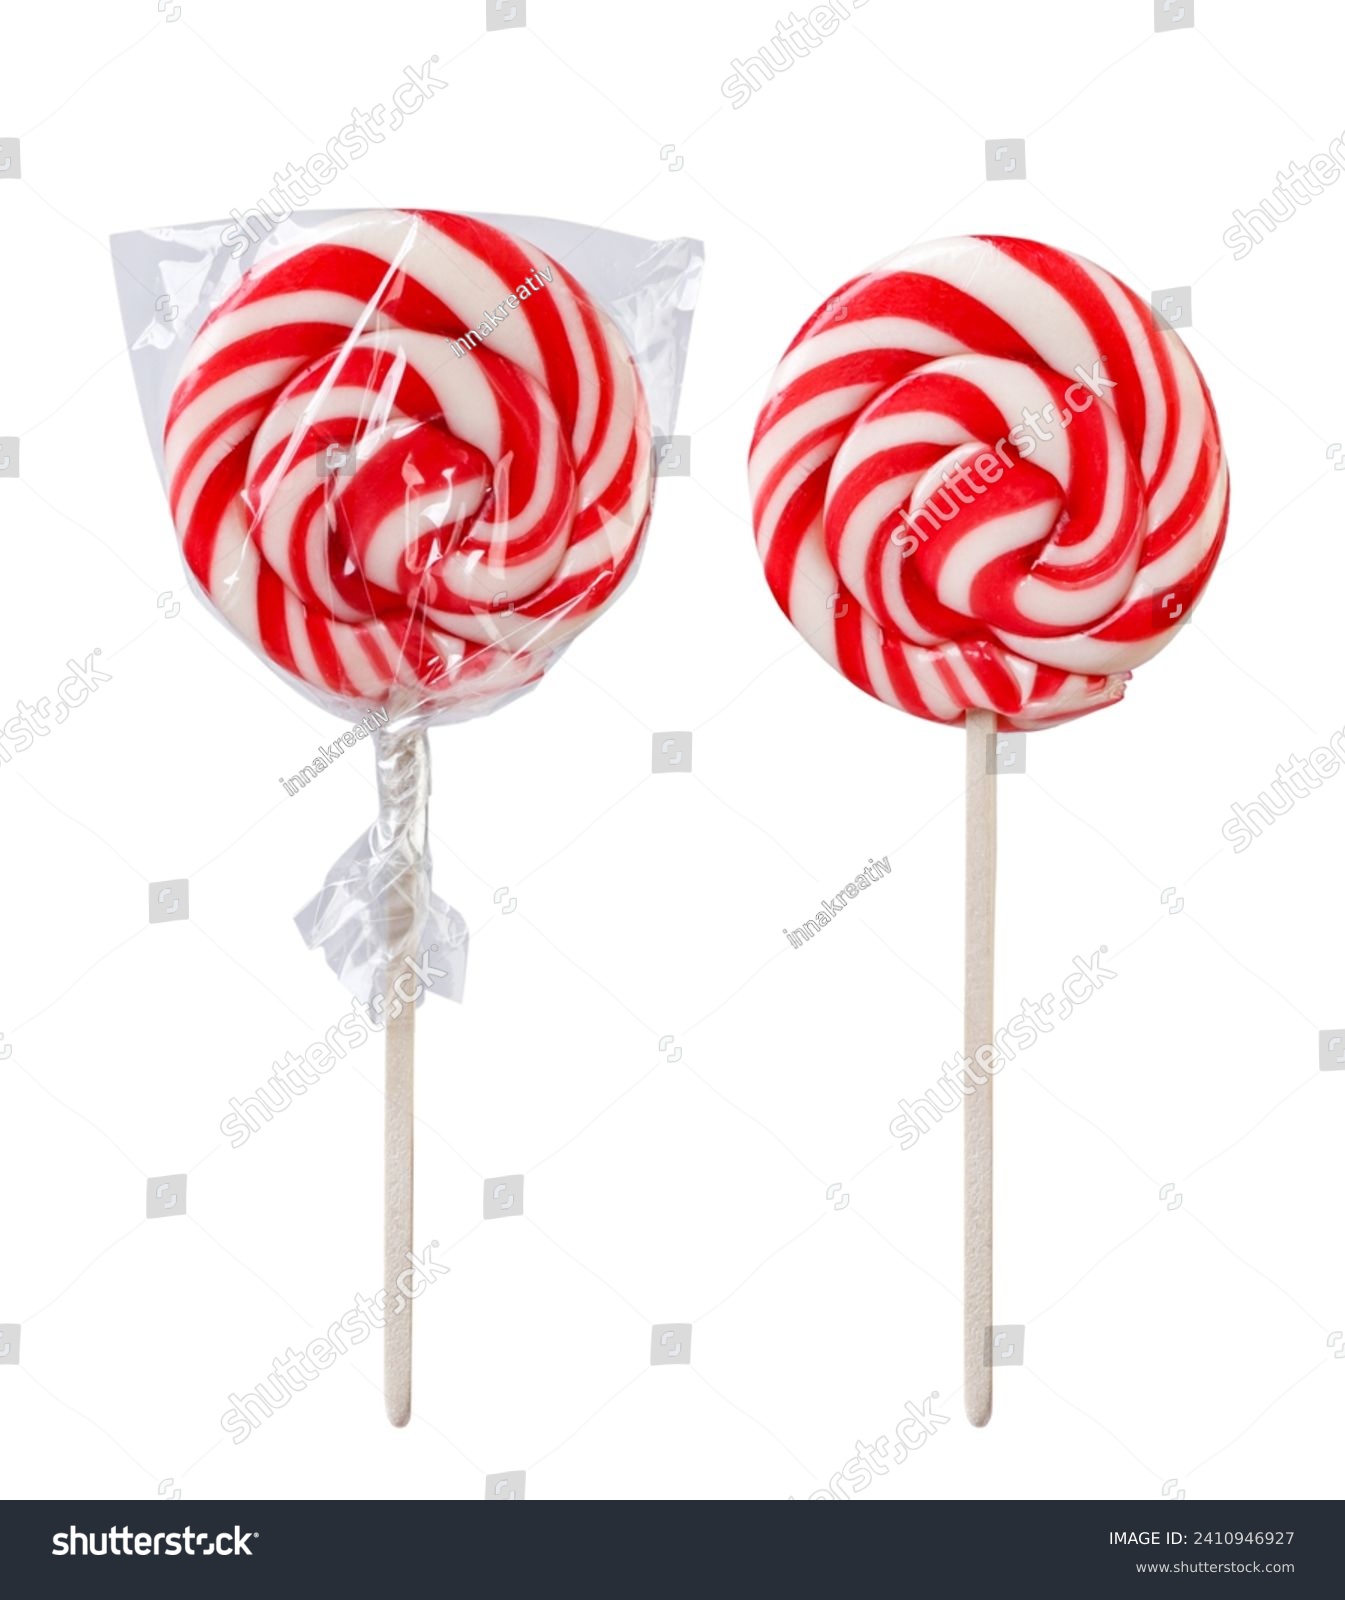 Lollipop in packaging and without close-up on a white background. Isolated #2410946927